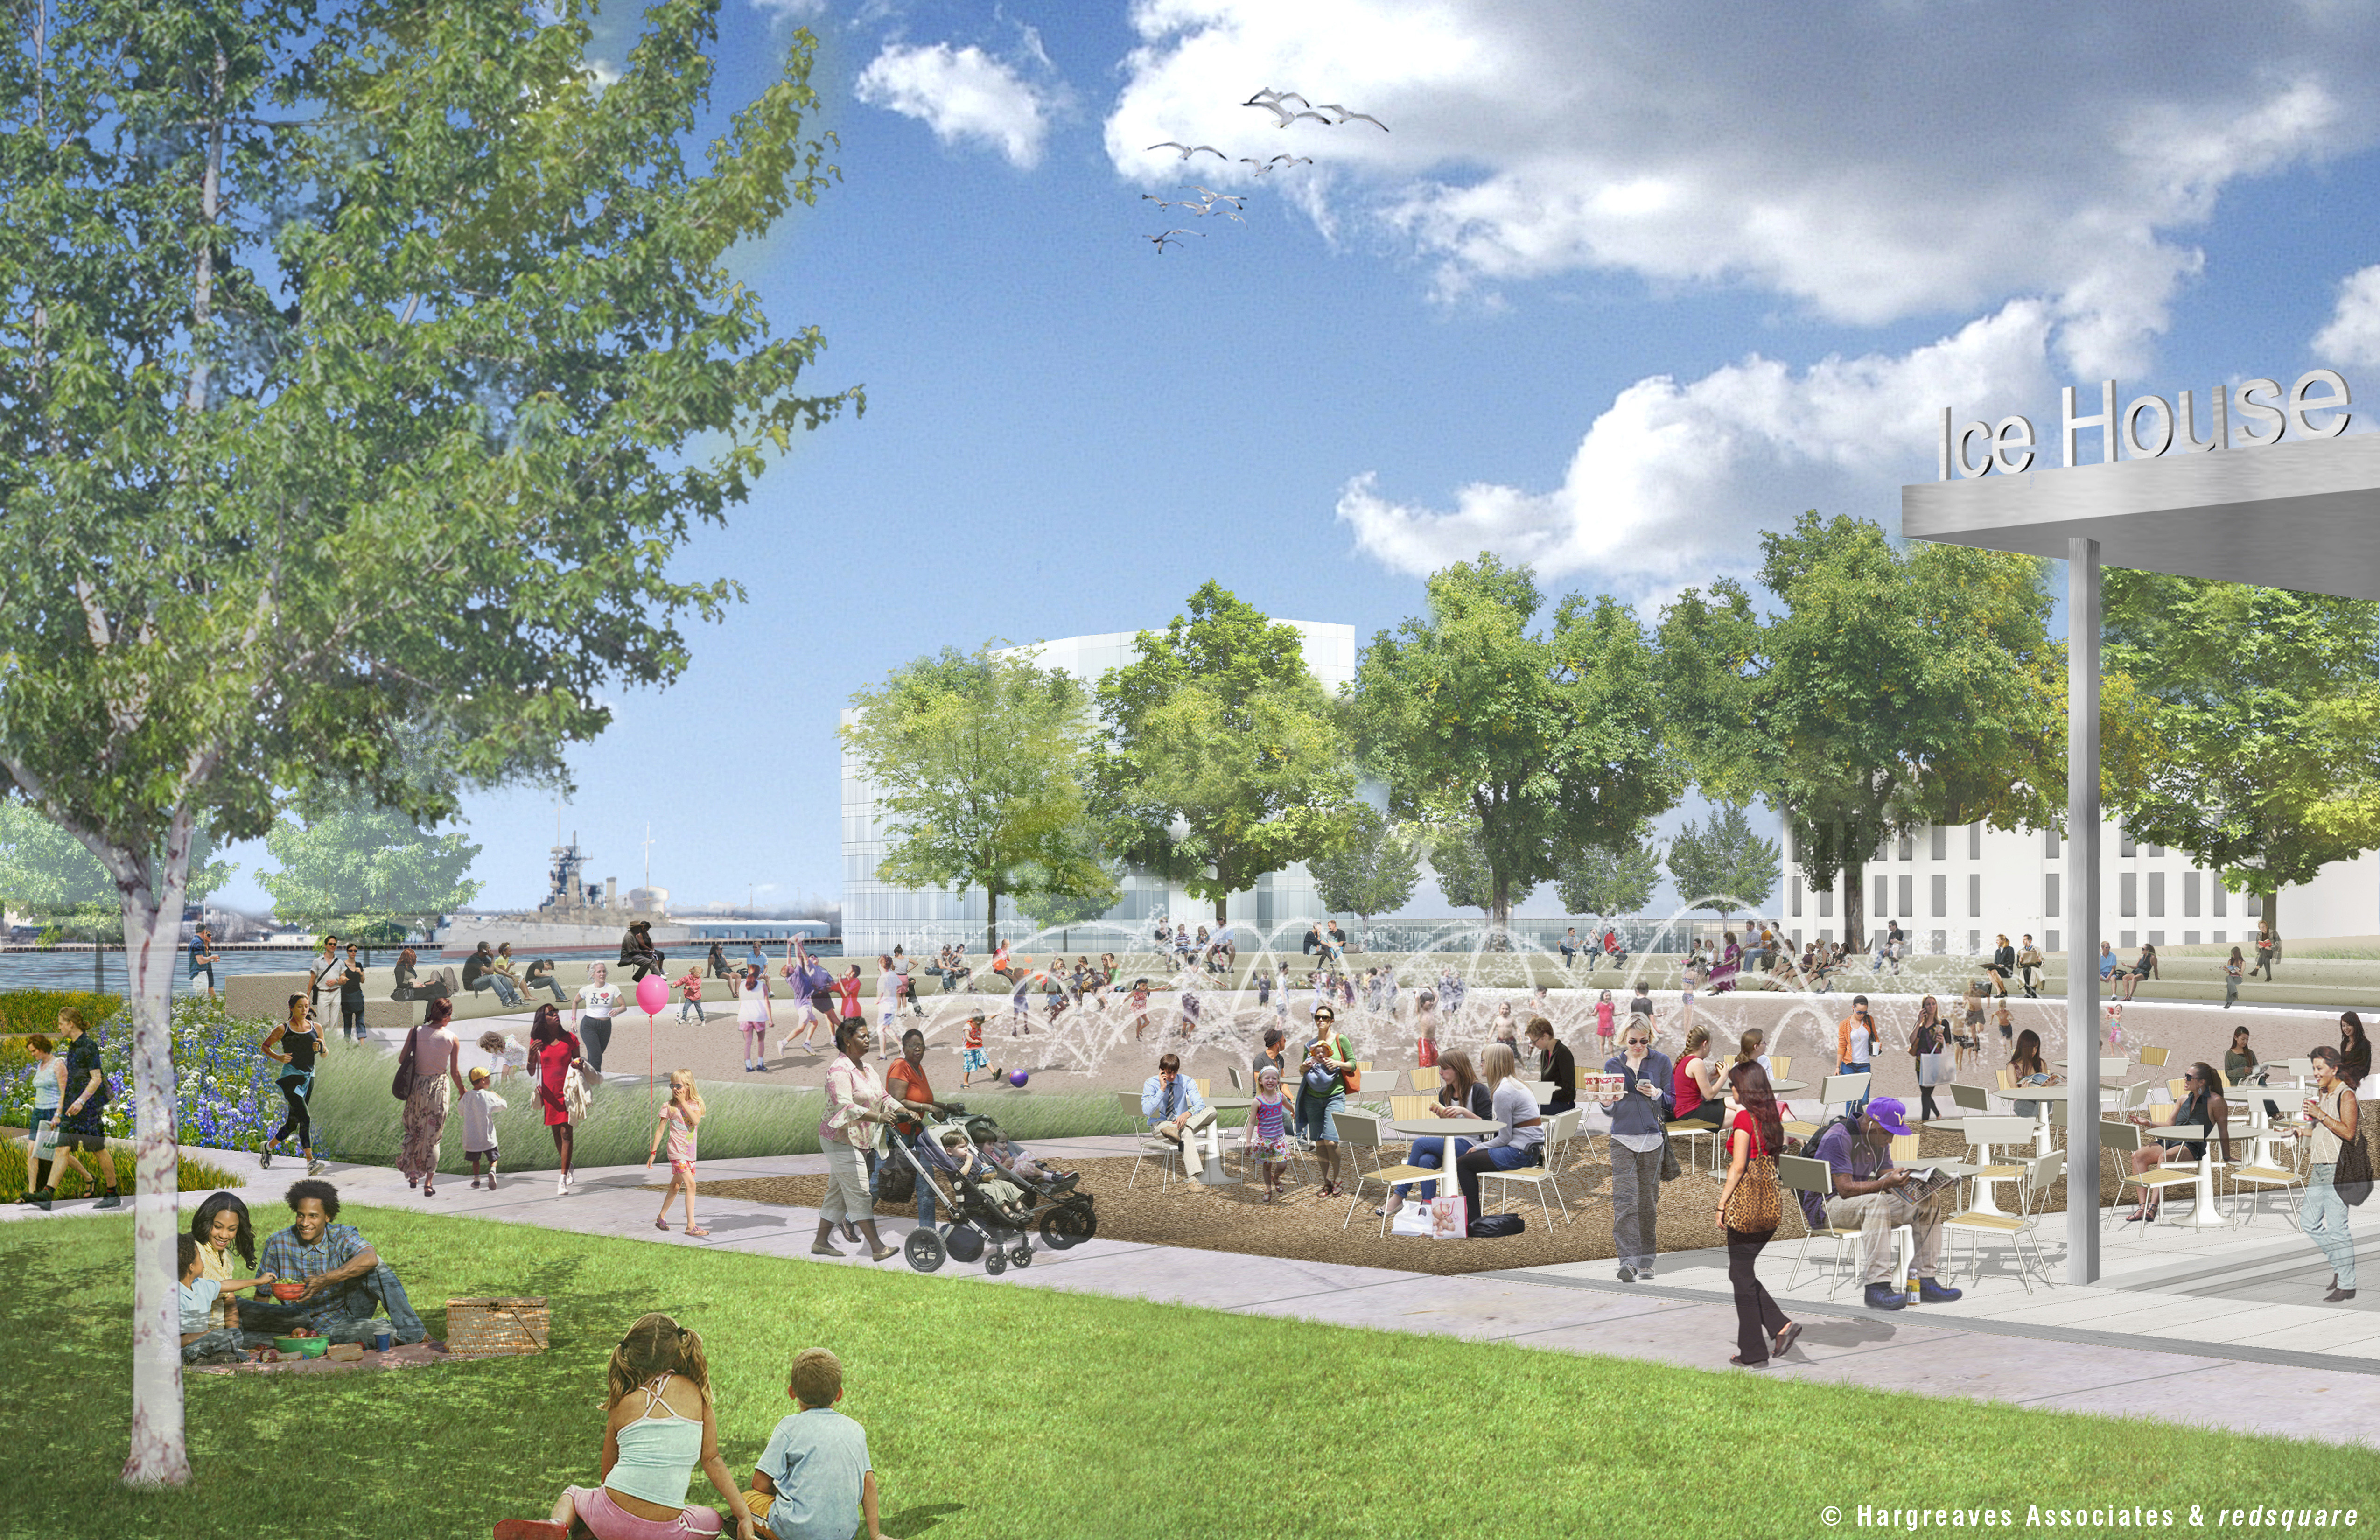 Penn's Landing Park in summer with sprayground,© Hargreaves Associates & redsquare 